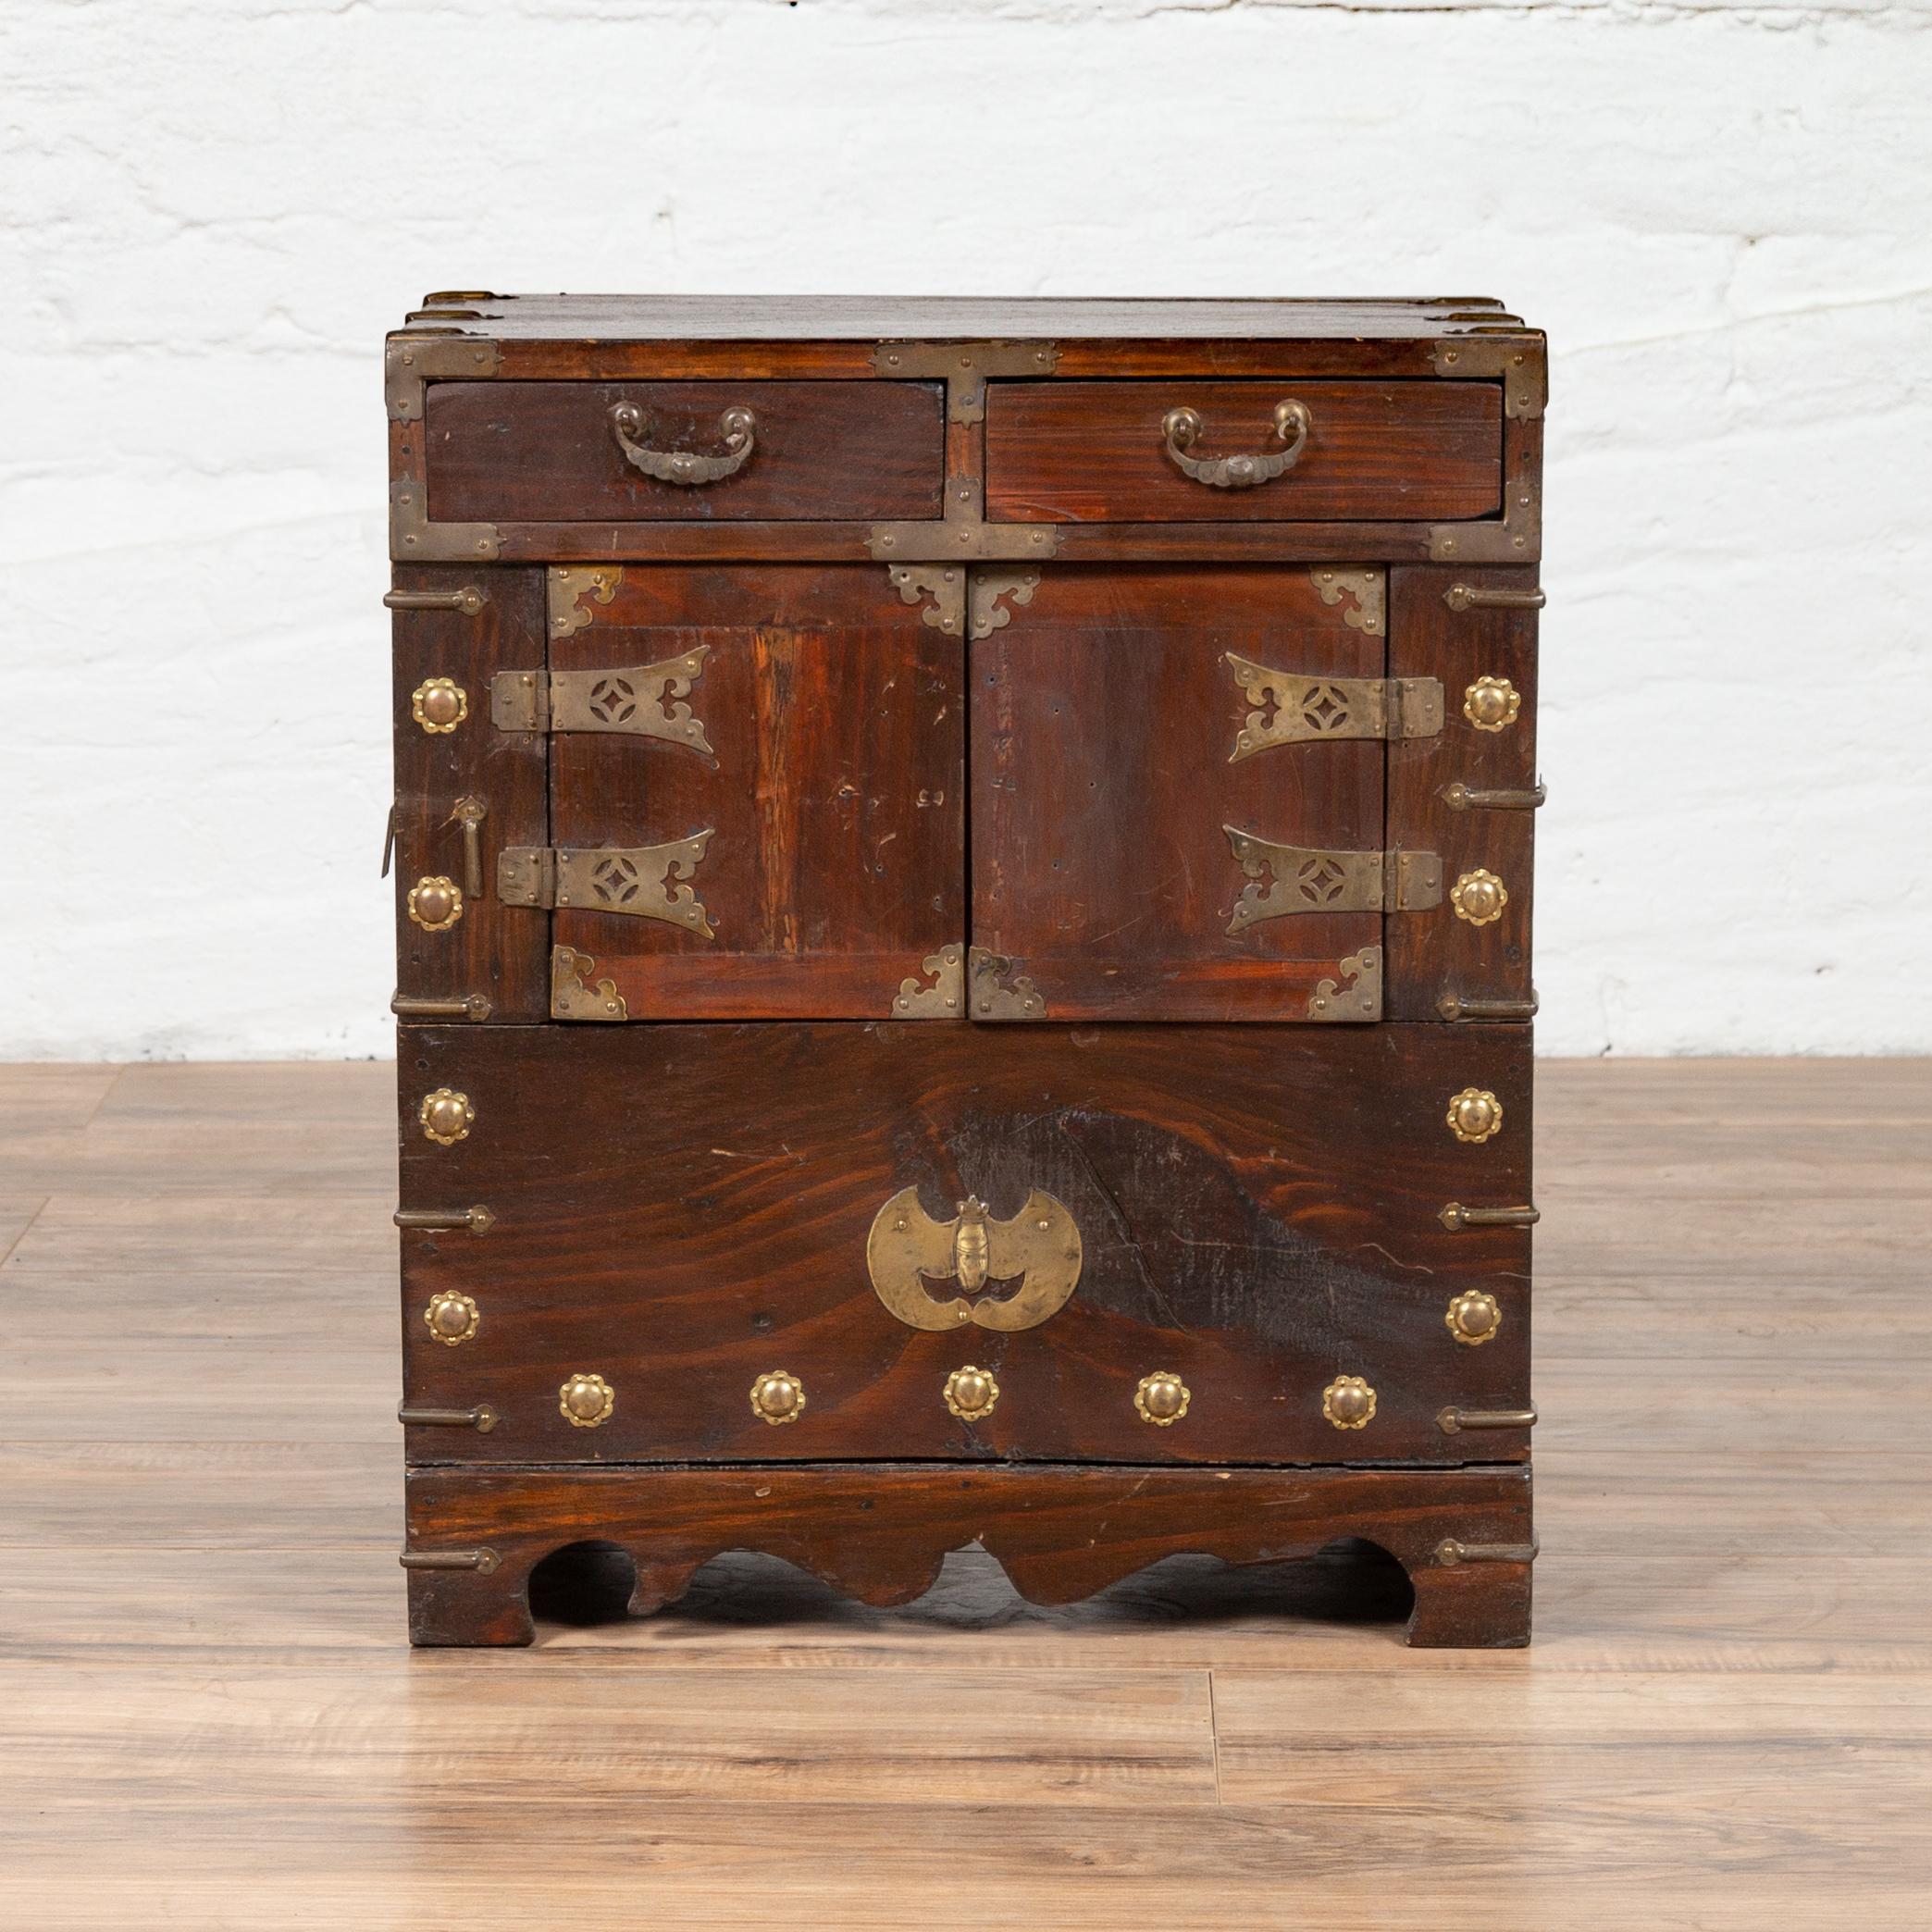 A Korean vintage side chest with two drawers, double doors and brushed brass hardware. This small Korean cabinet features a rectangular top with brass braces on the sides, resting above two upper drawers, each fitted with a bail handle. A pair of